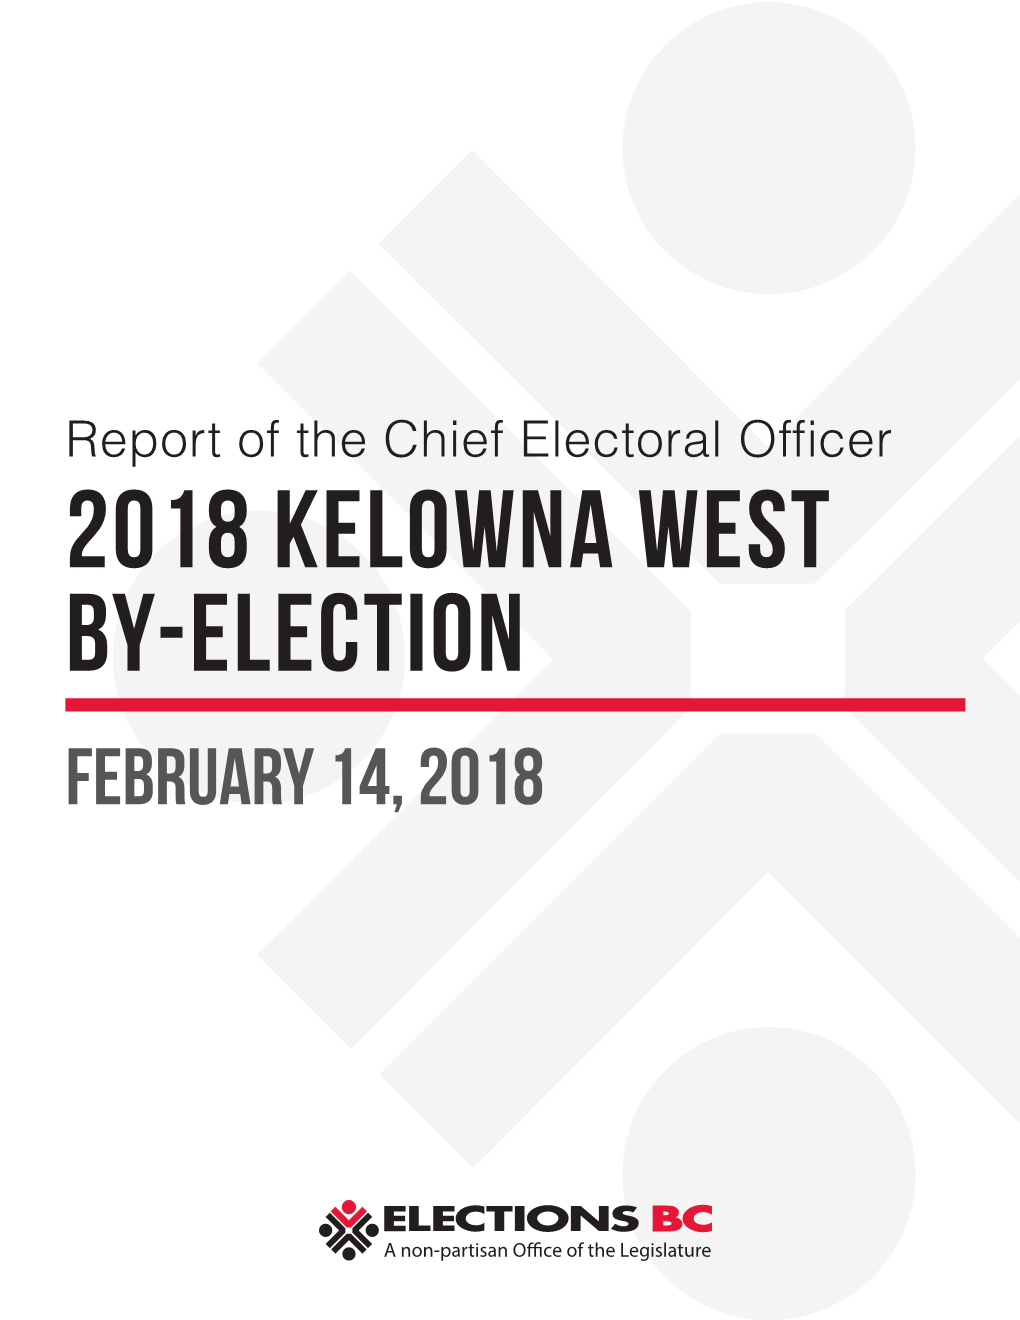 Report of the Chief Electoral Officer on the 2018 Kelowna West By-Election